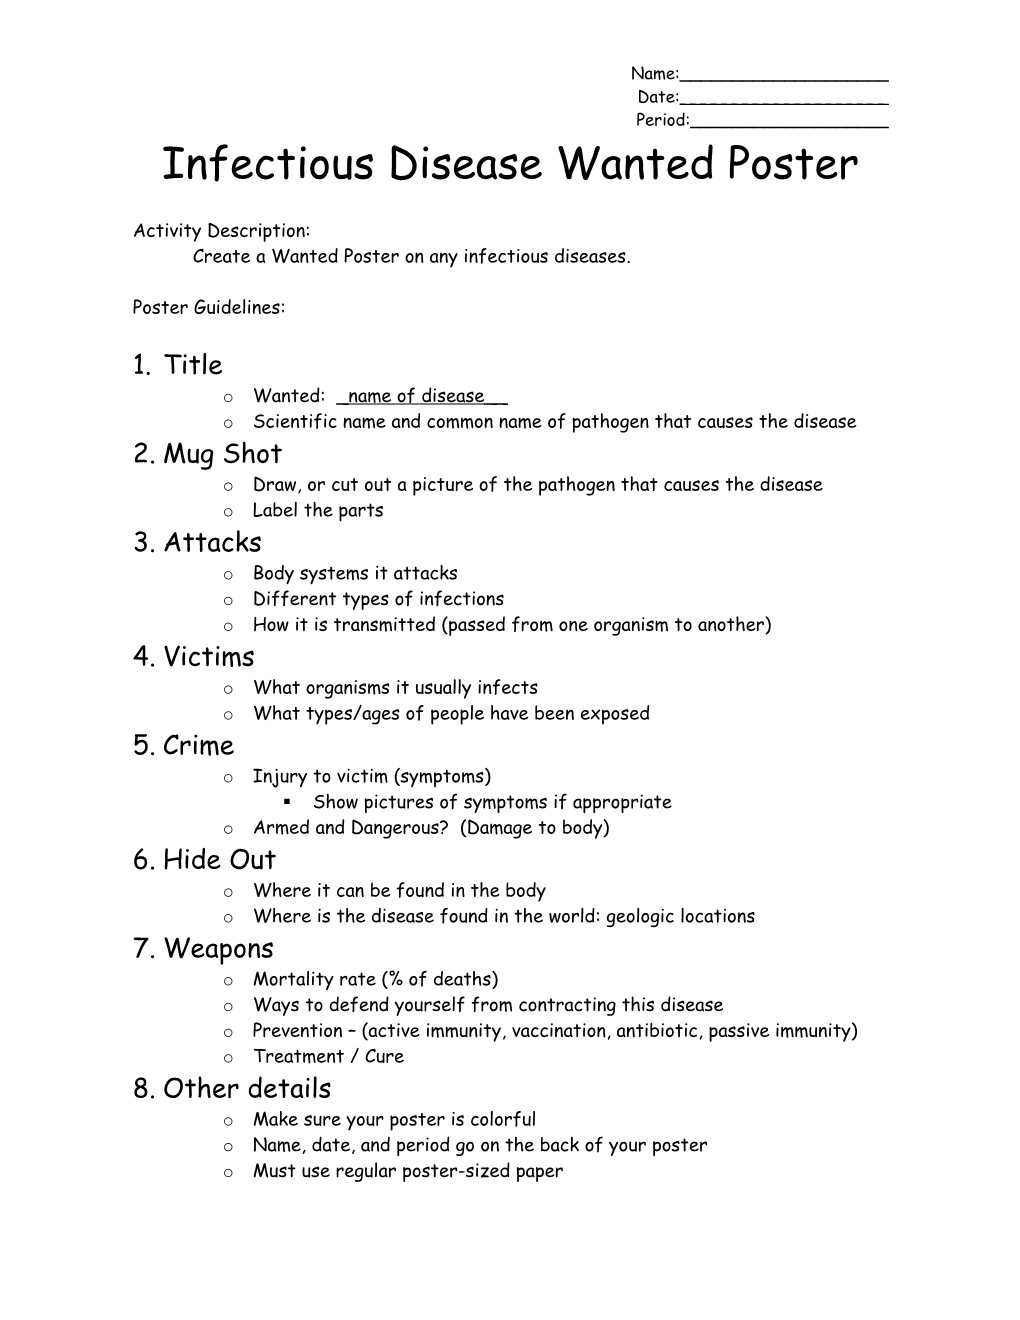 Infectious Disease Wanted Poster